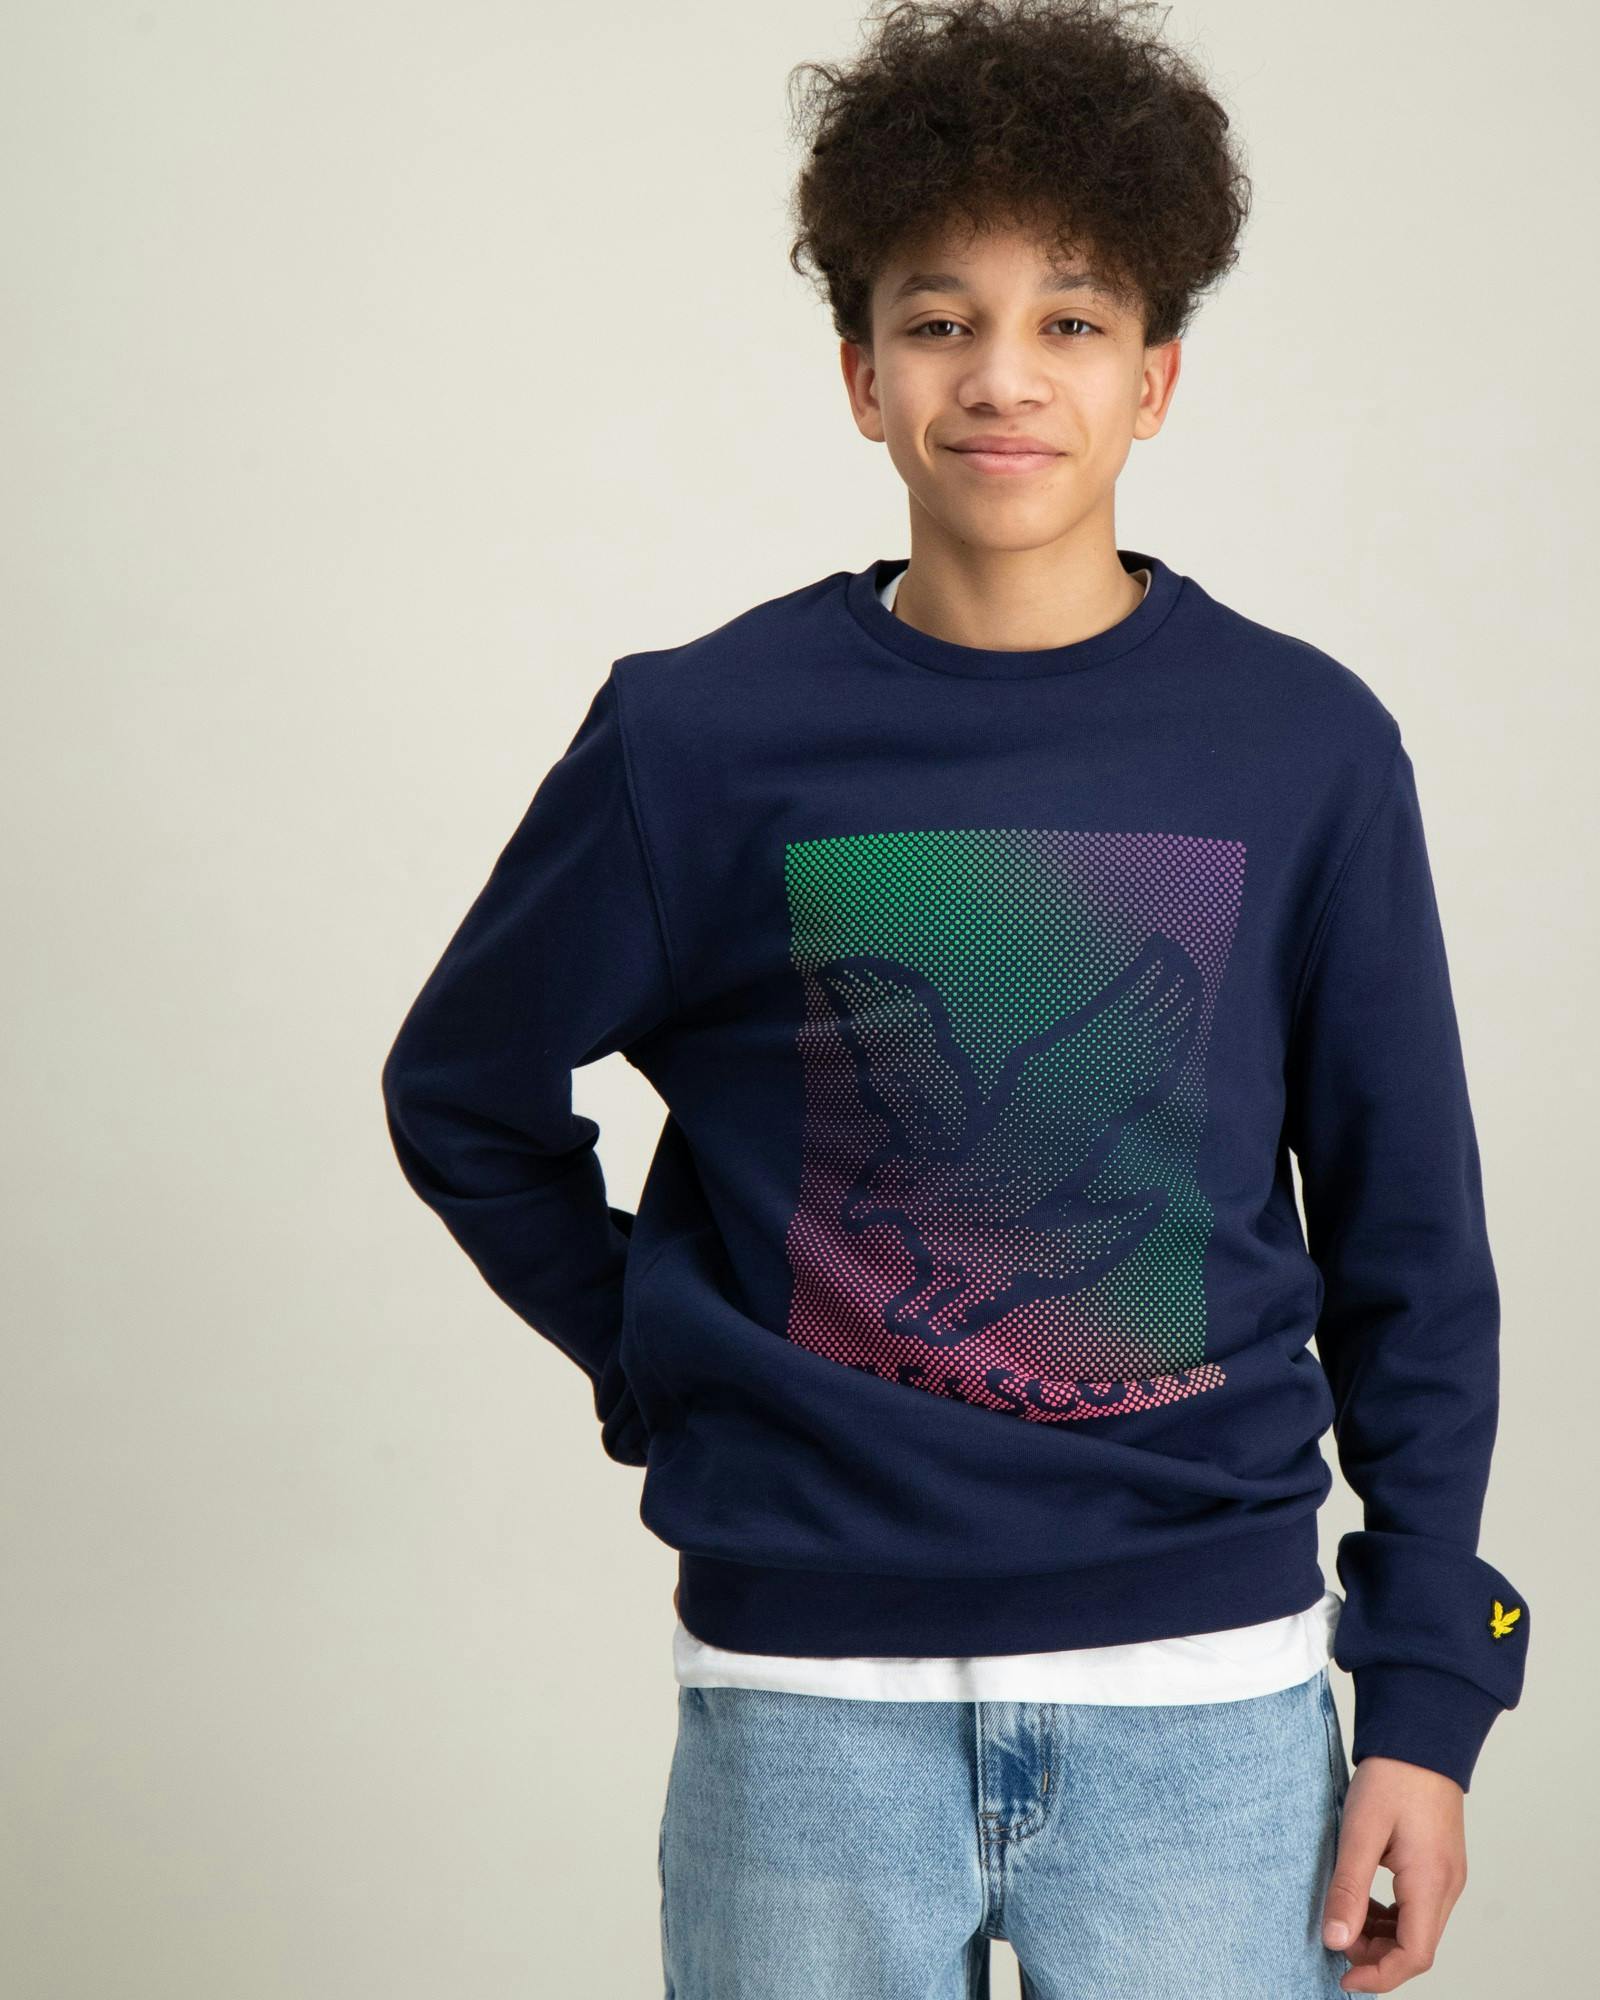 Dotted Eagle Graphic Sweatshirt